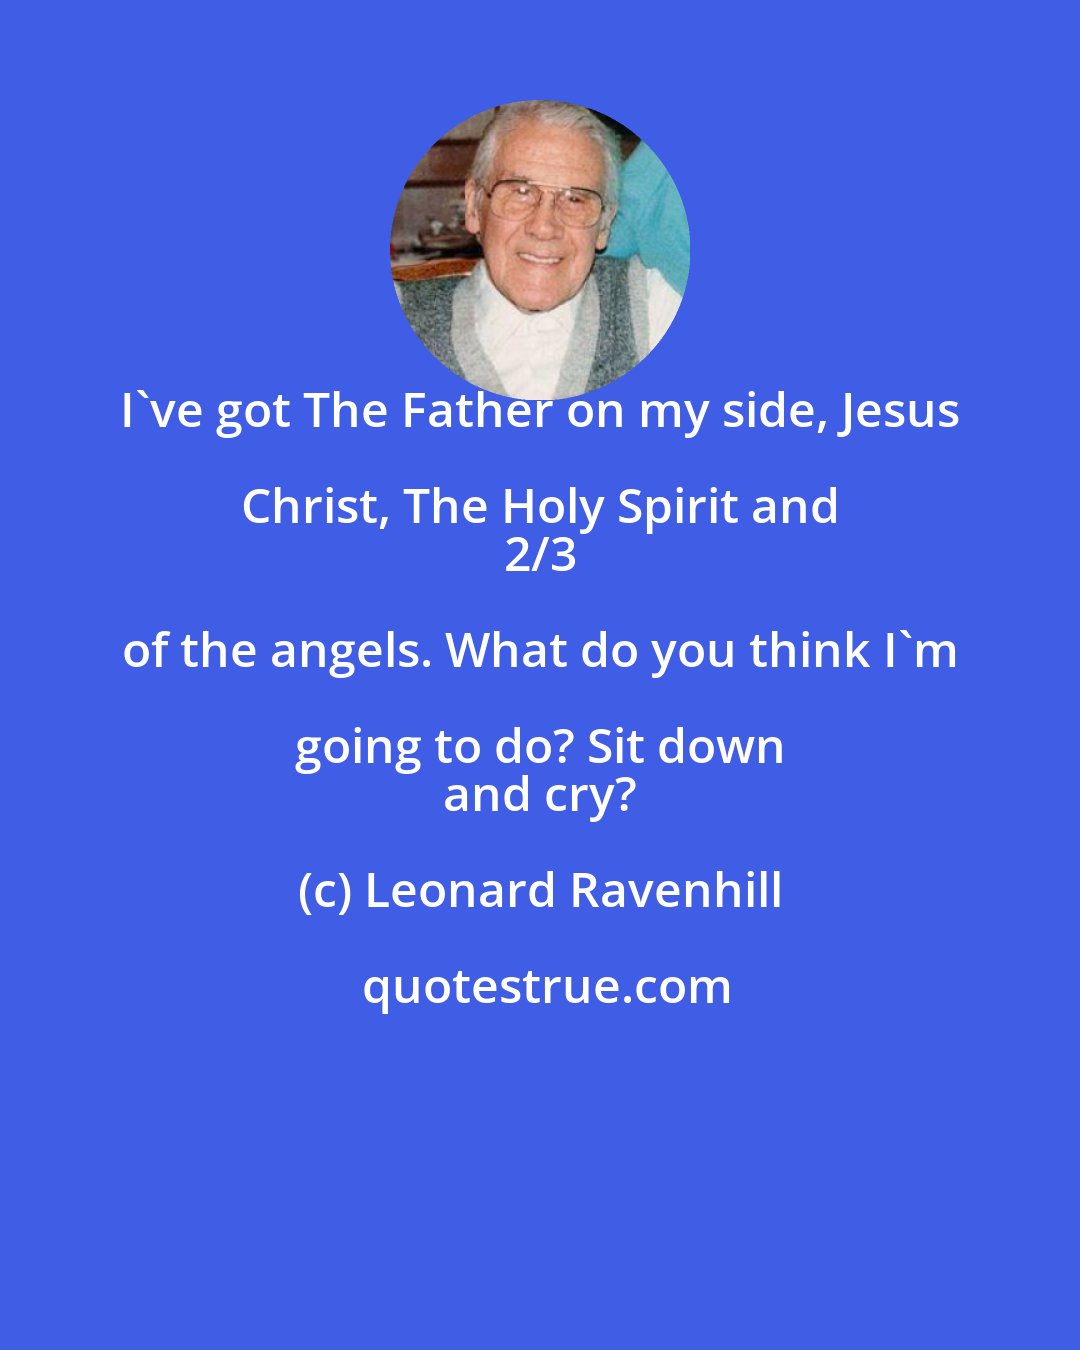 Leonard Ravenhill: I've got The Father on my side, Jesus Christ, The Holy Spirit and 
 2/3 of the angels. What do you think I'm going to do? Sit down 
 and cry?